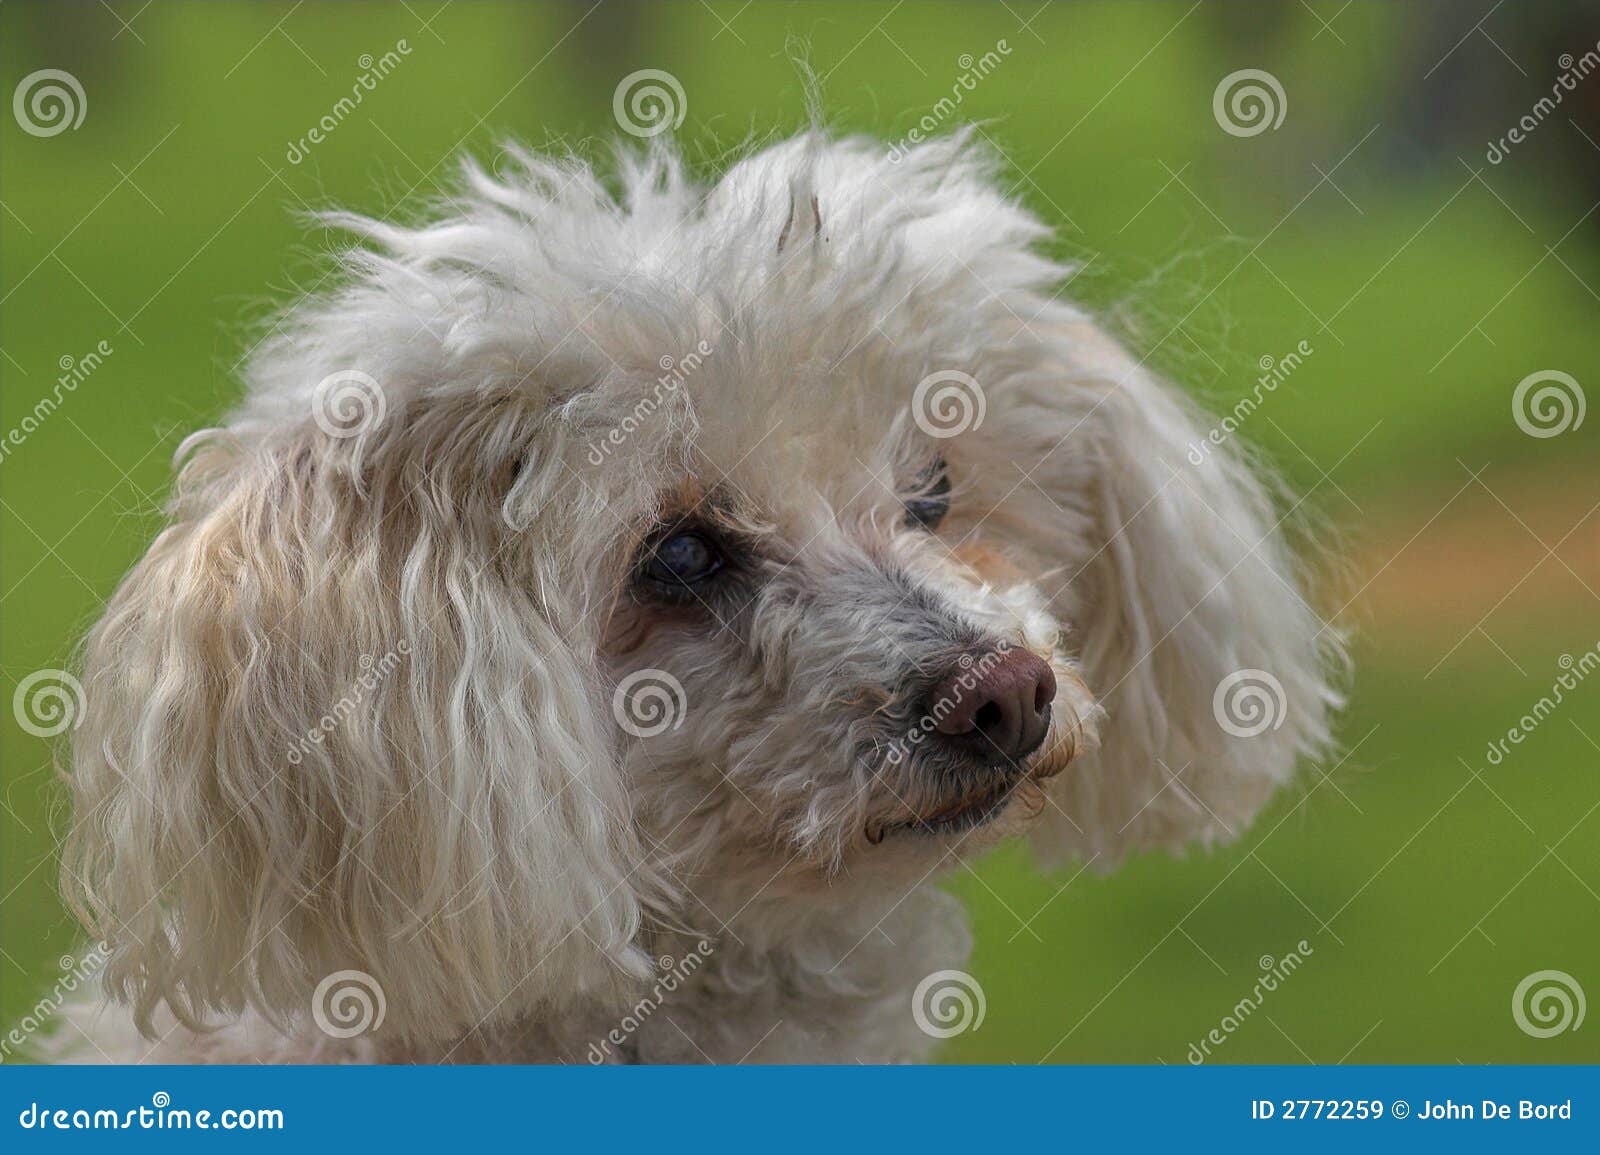 Adorable Toy Poodle Dog White